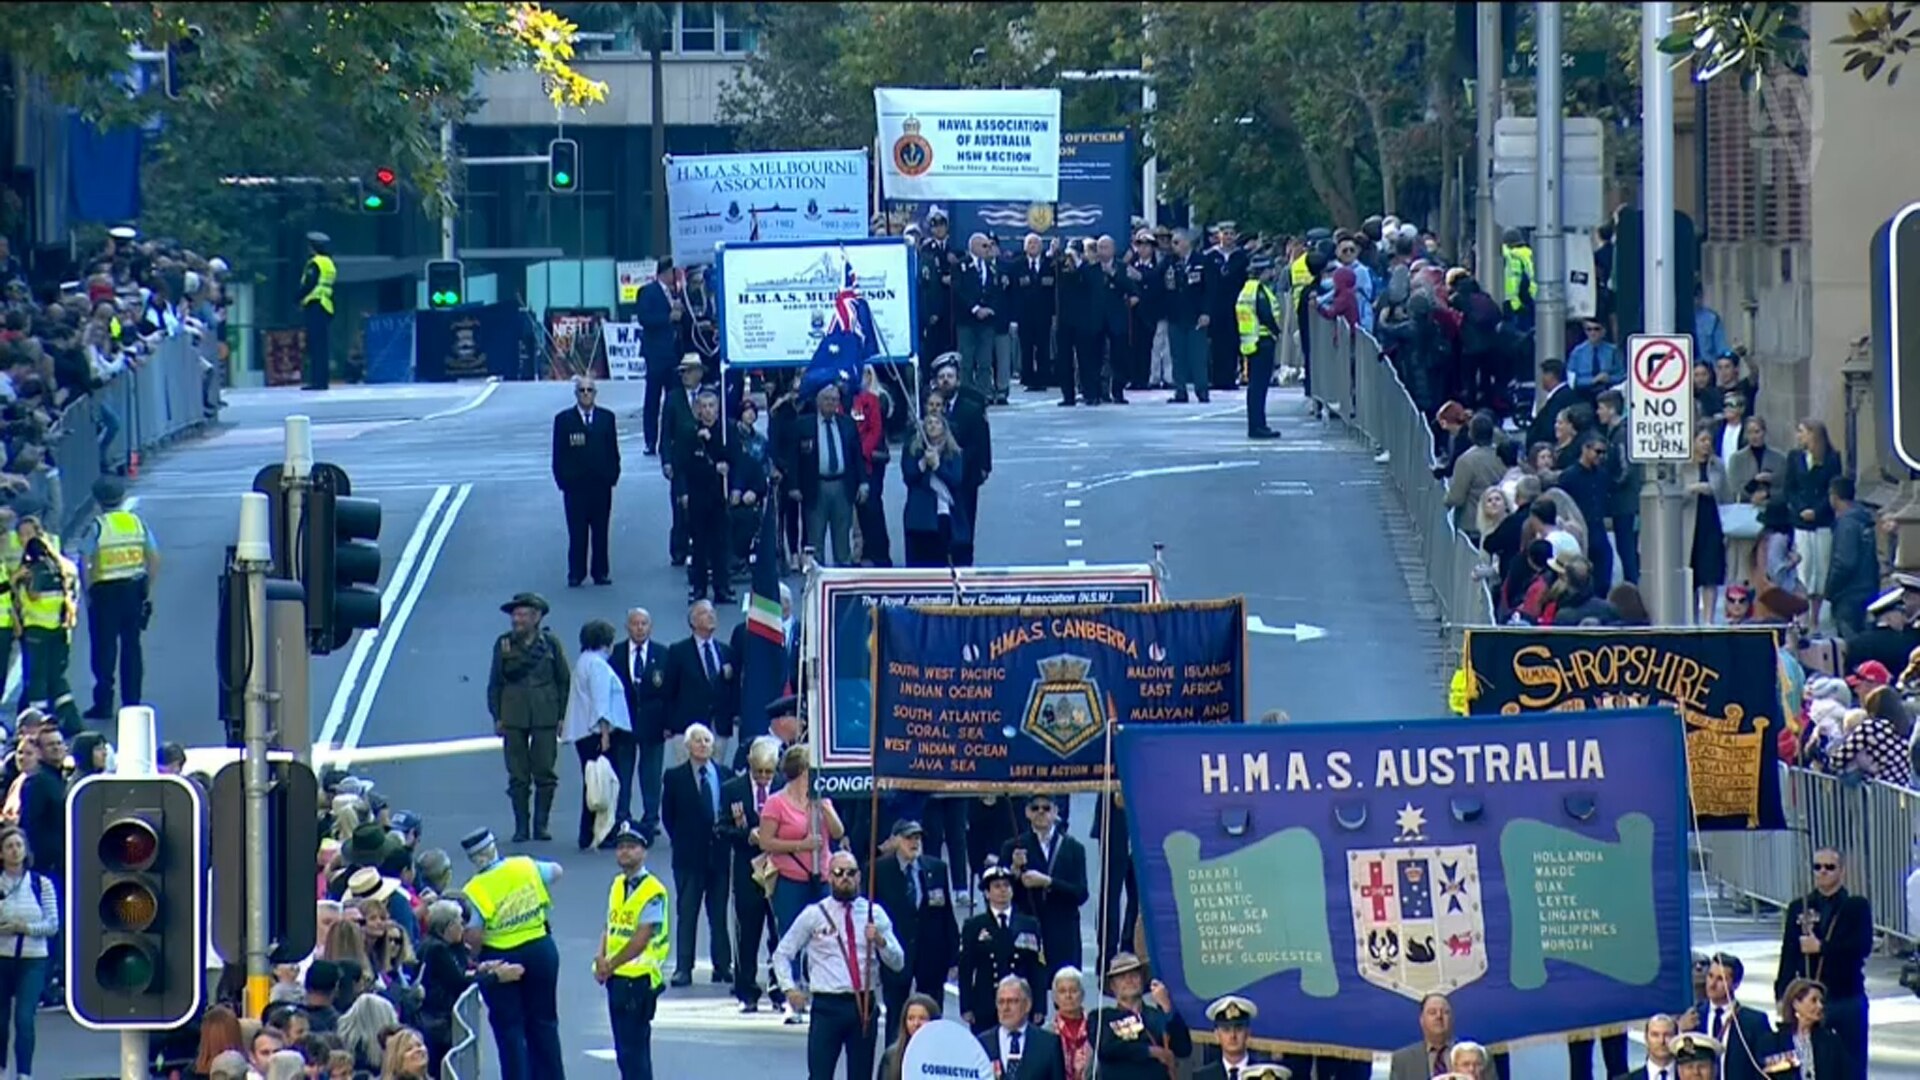 A total of 10,000 people have been allowed to march in the ANZAC Day parade in Sydney.